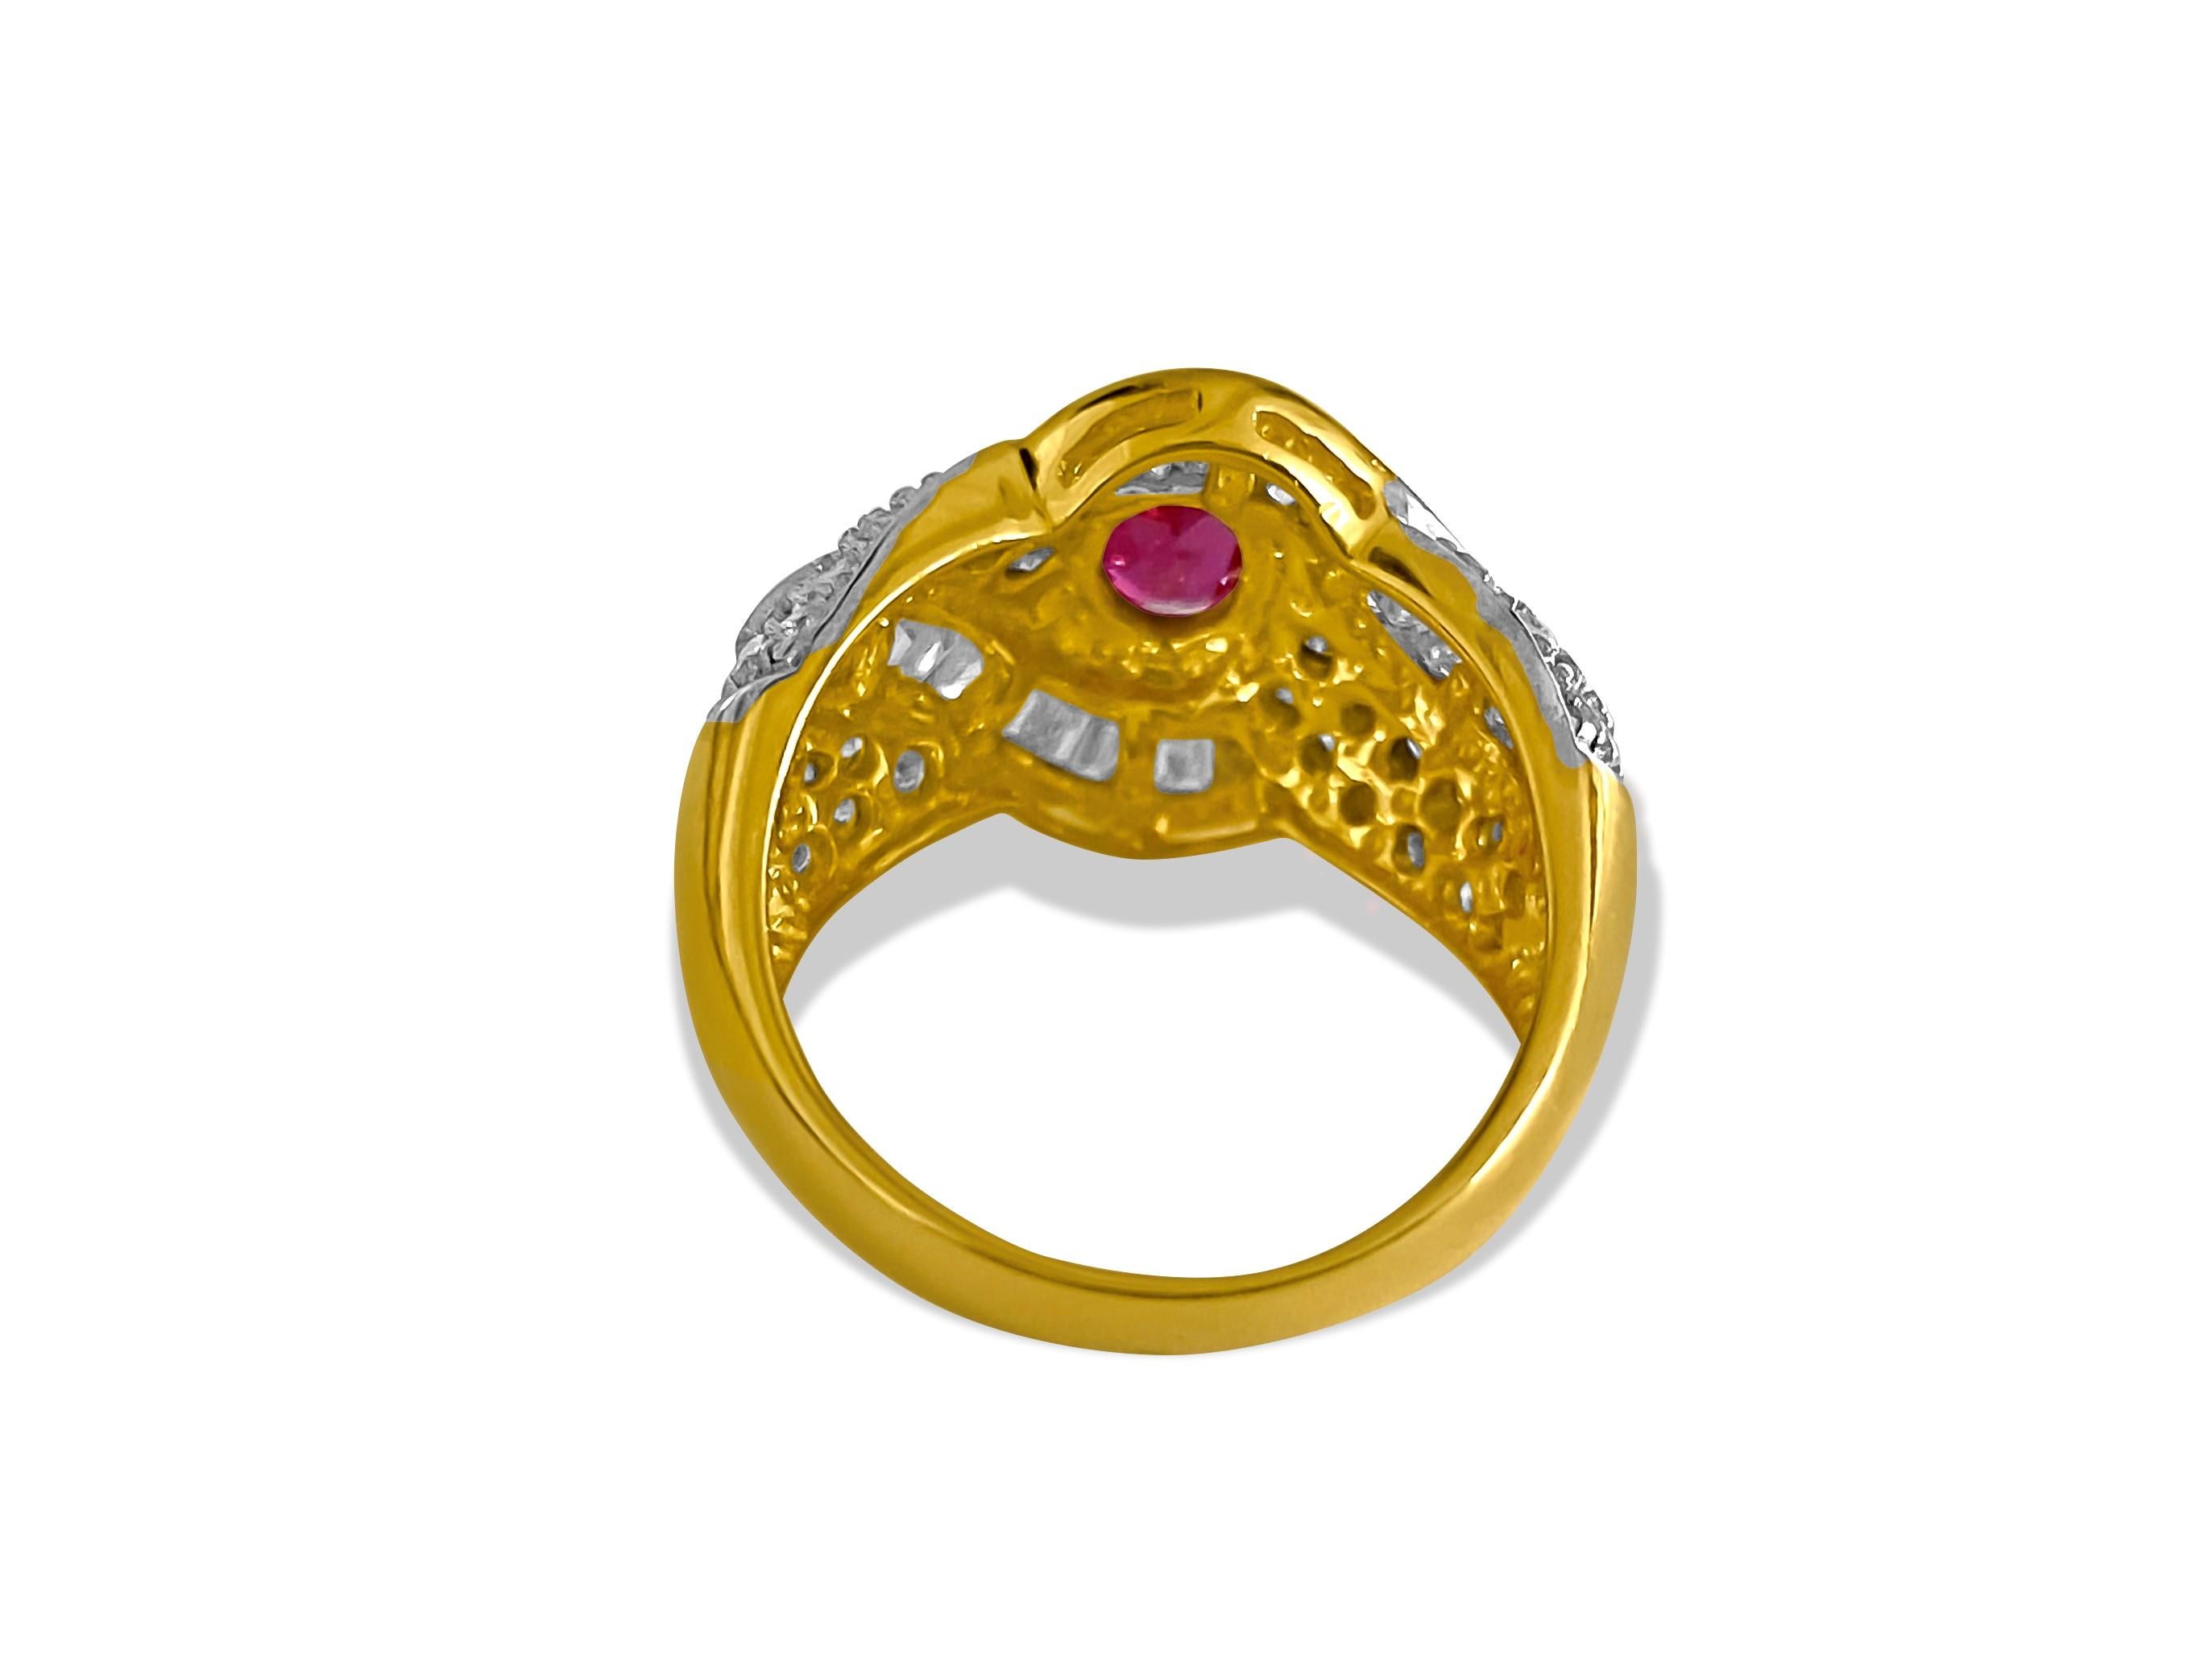 Women's Vintage 14 Karat Yellow Gold 2.70 Carat Ruby Diamond Ring In Excellent Condition For Sale In Miami, FL